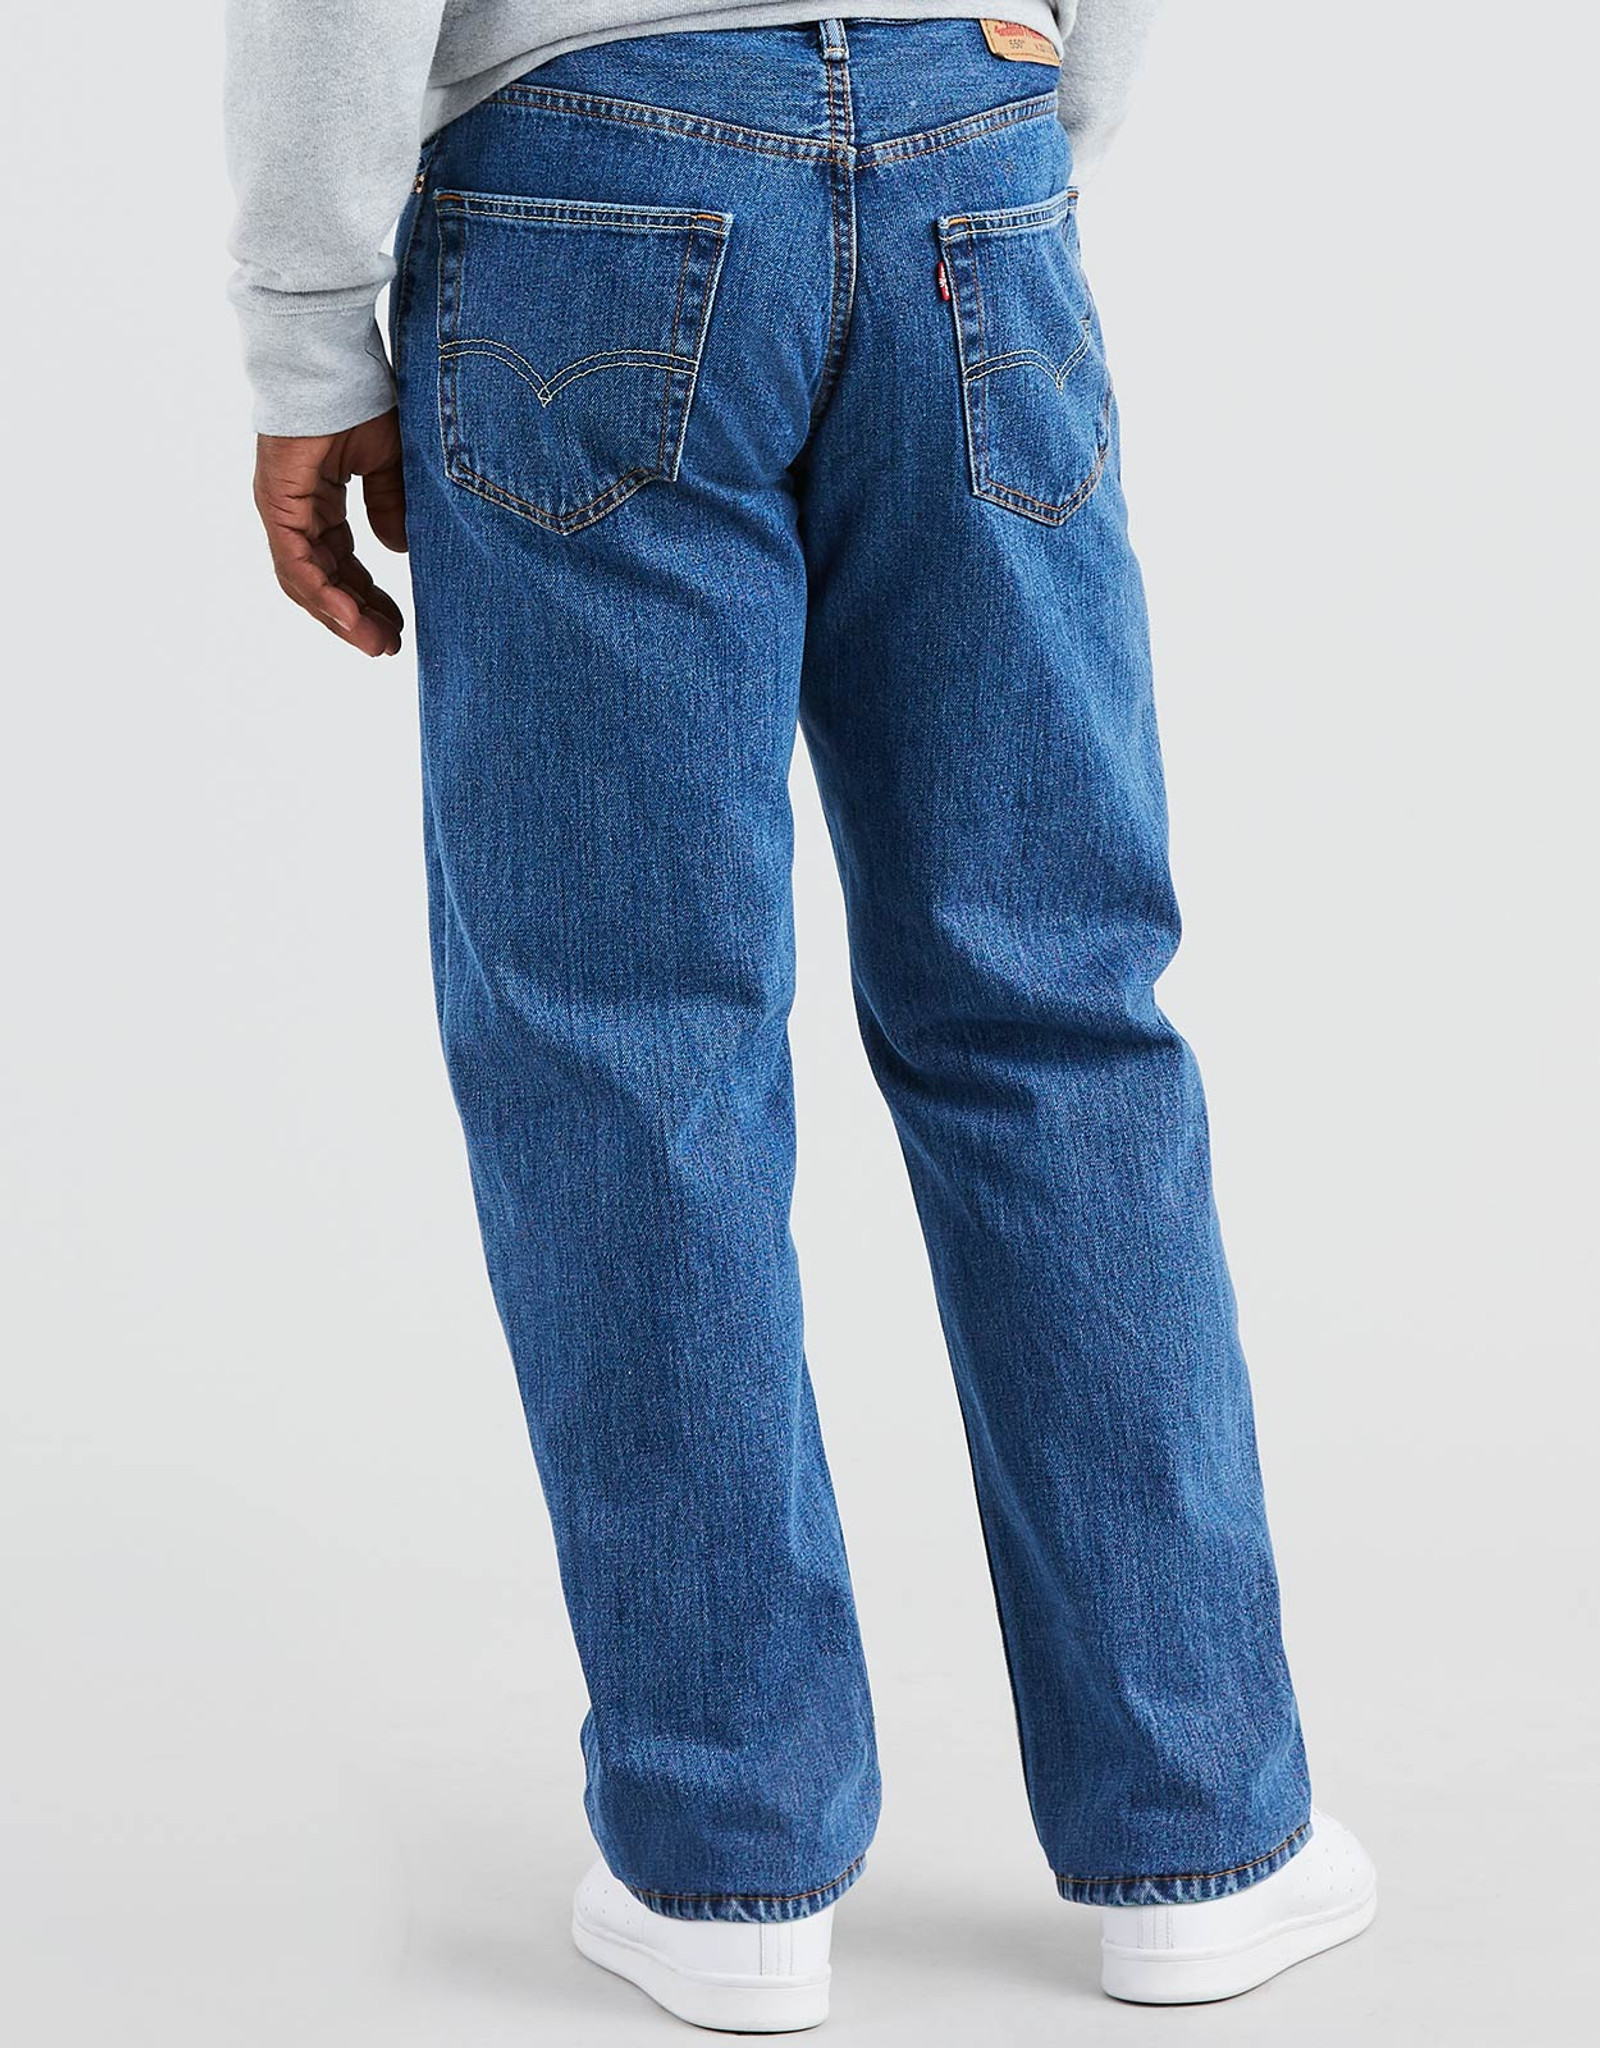 Levi's Men's 550 Relaxed Mid Rise Relaxed Fit Tapered Leg Jeans - Medium  Stonewash (Big & Tall)